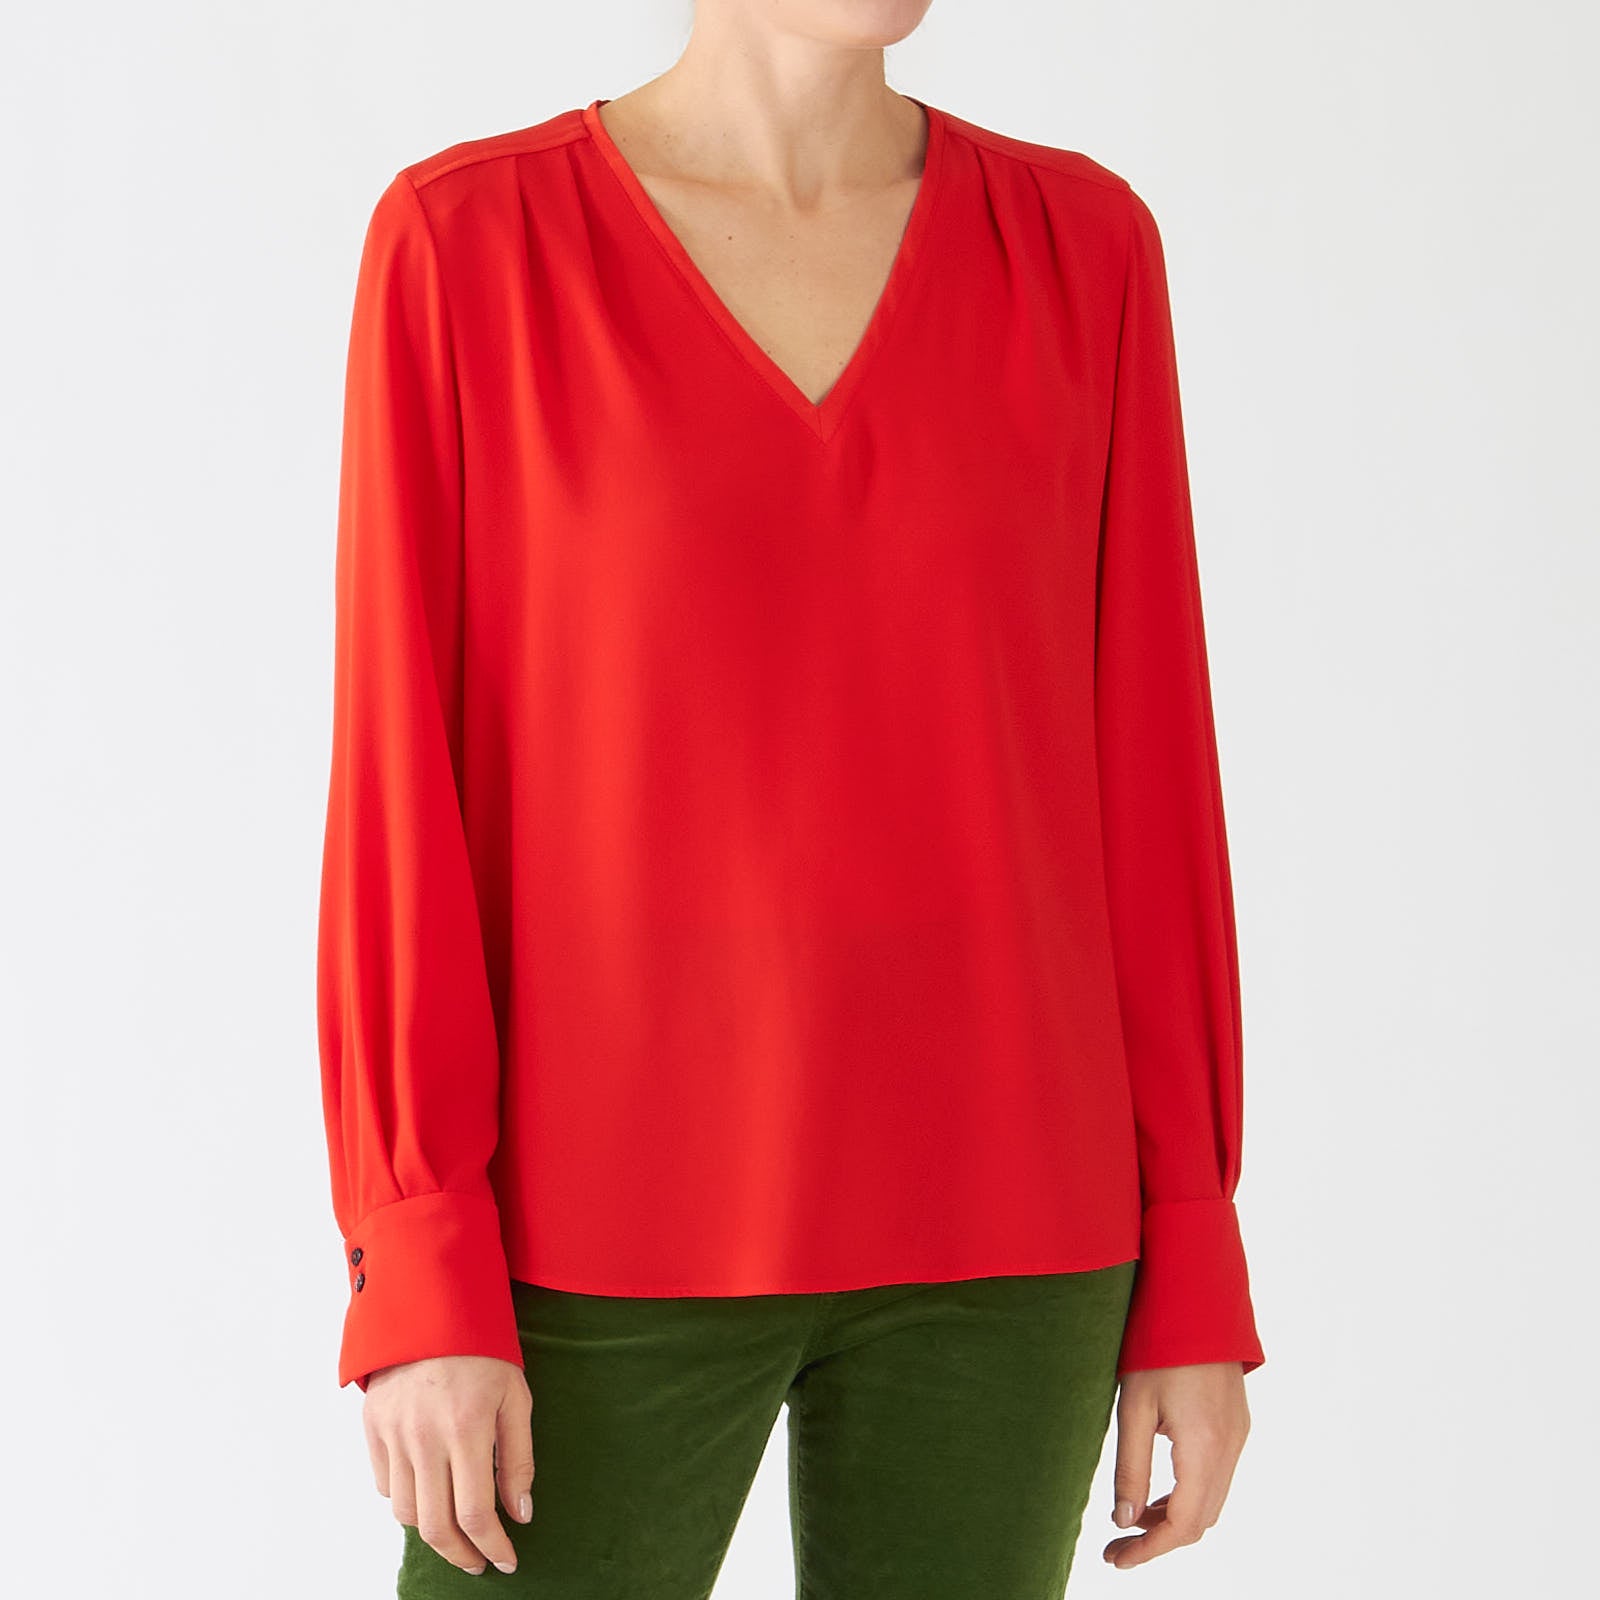 Bright Fire Red V-Neck Flowing Blouse